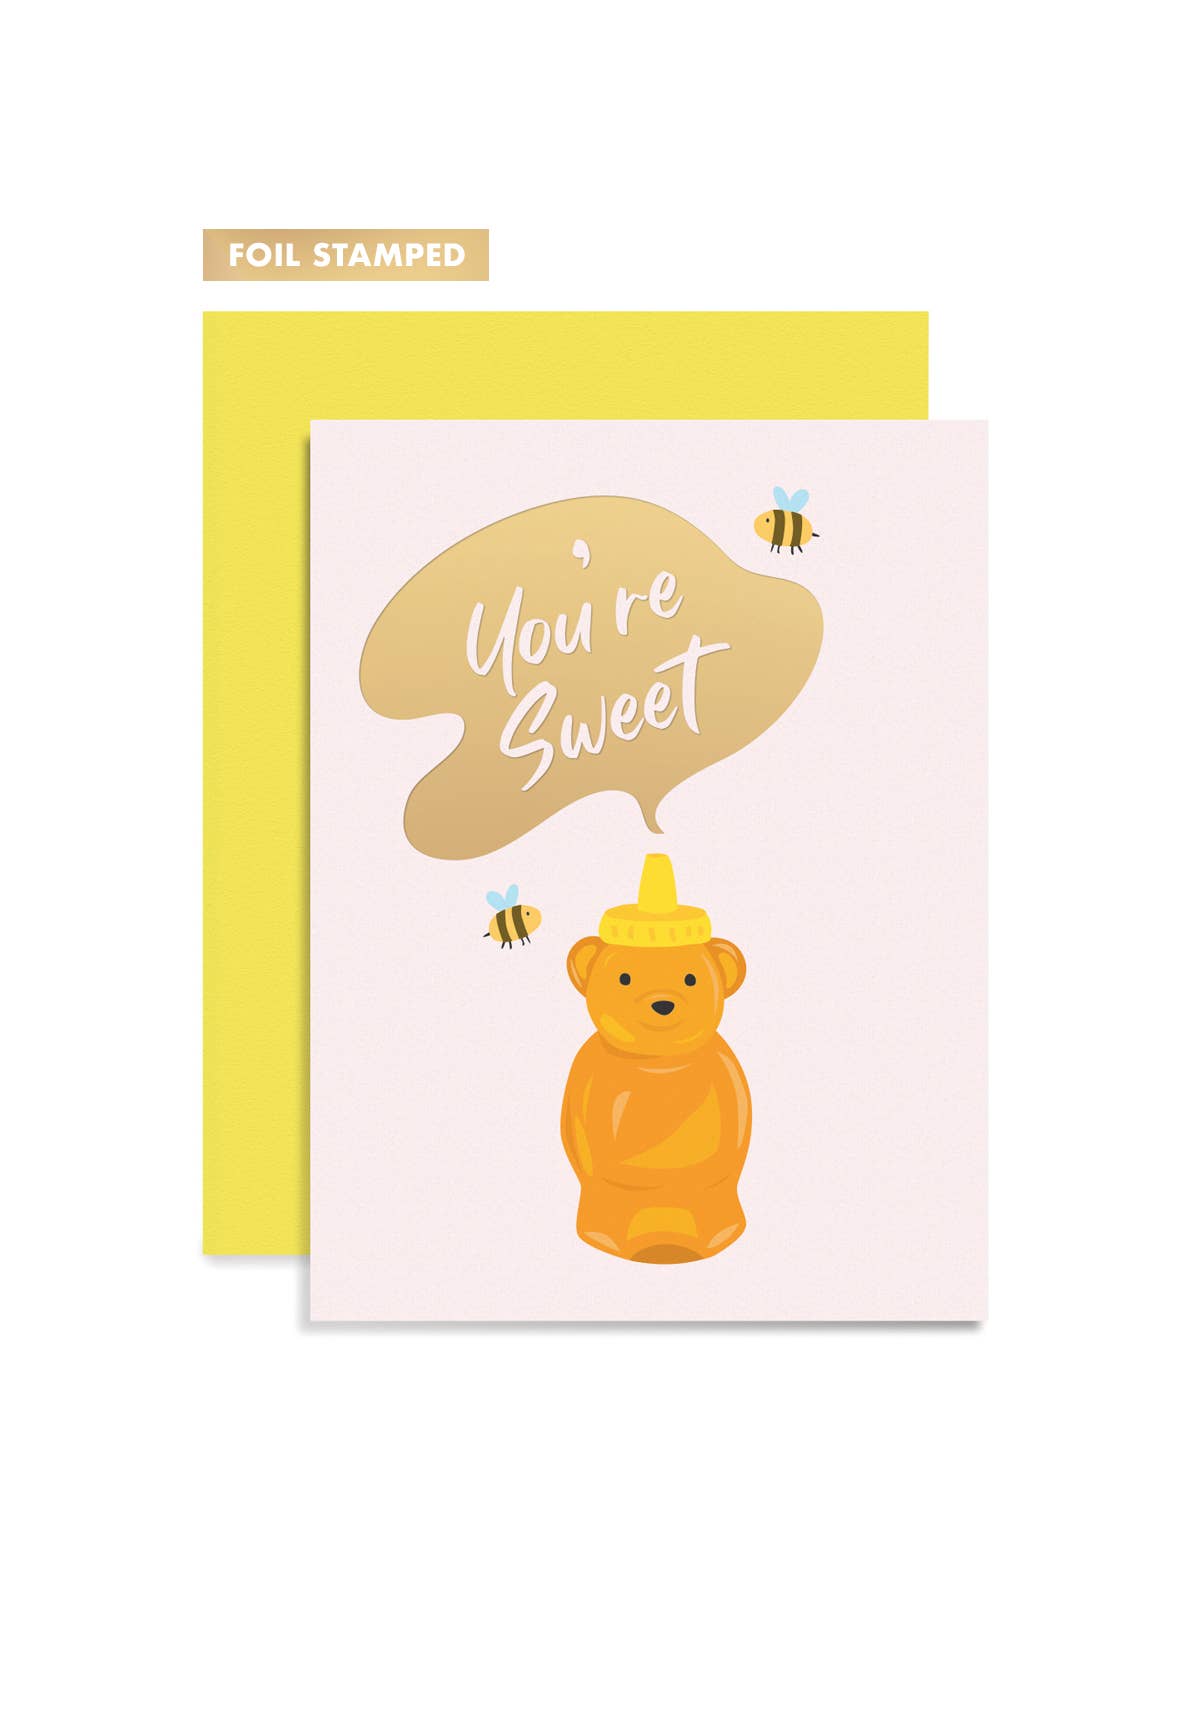 Greeting card with a honey bear that reads "You're sweet" 